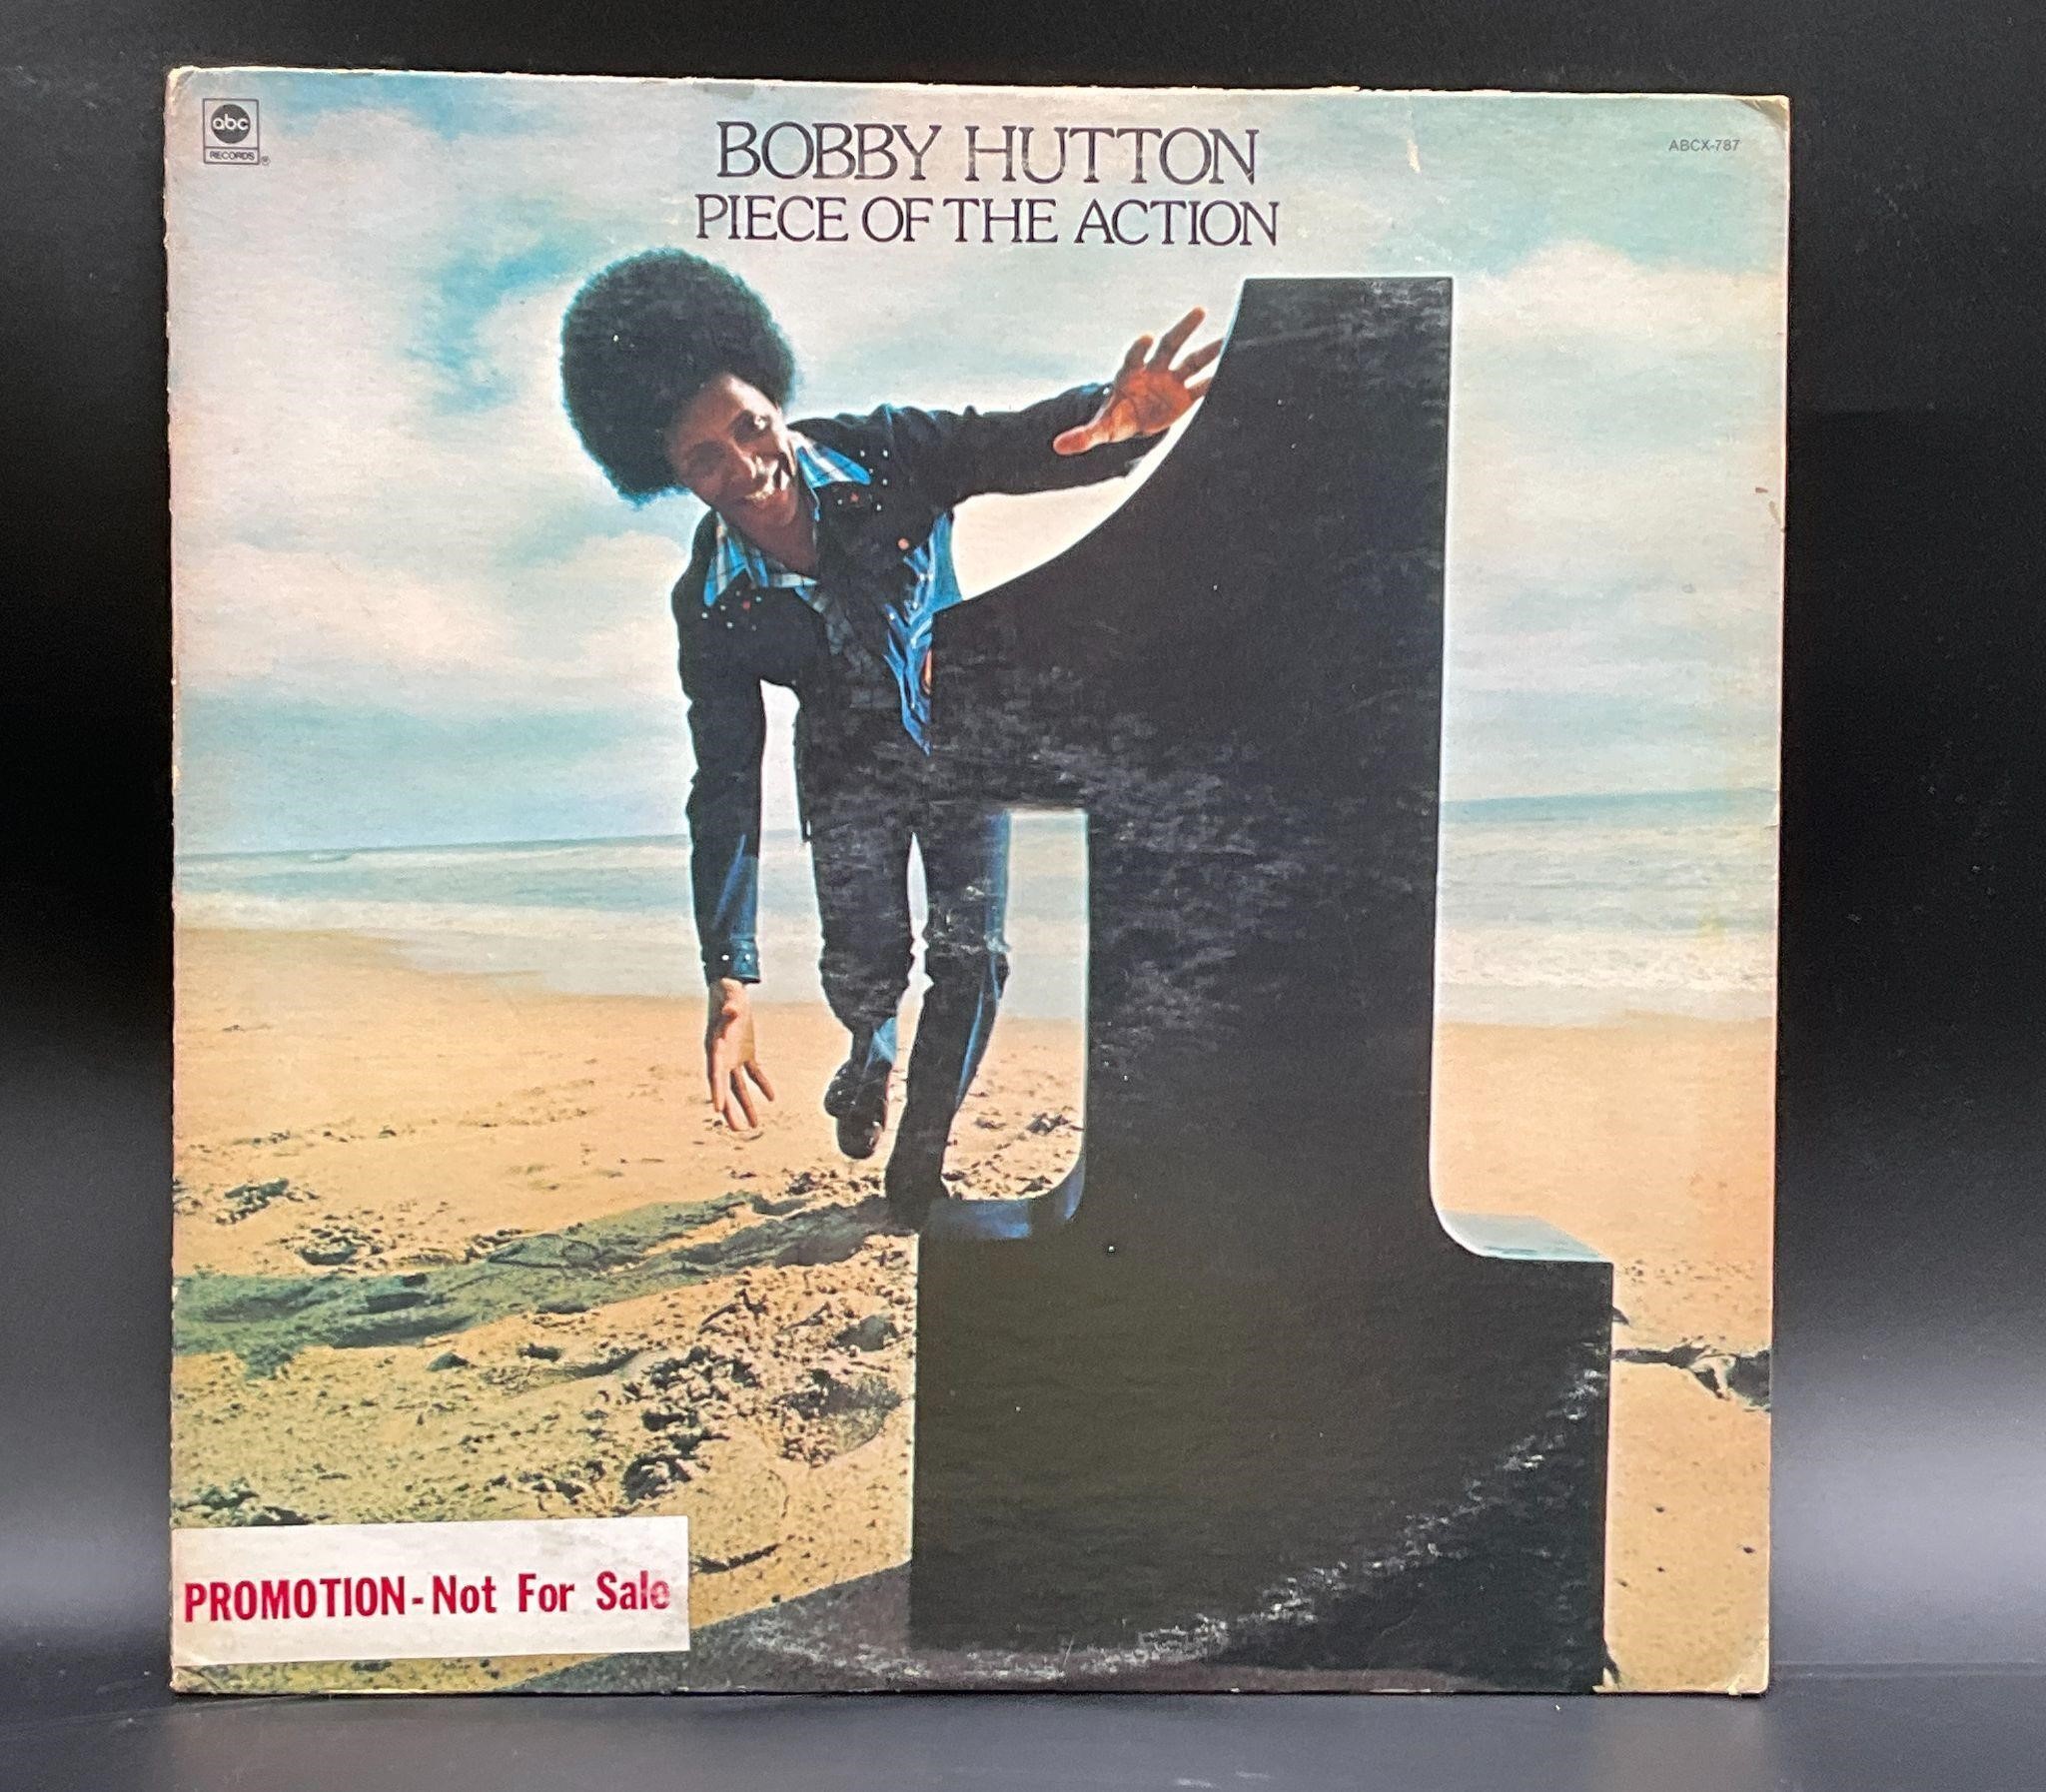 1973 Bobby Hutton "Piece of The Action" Promo LP